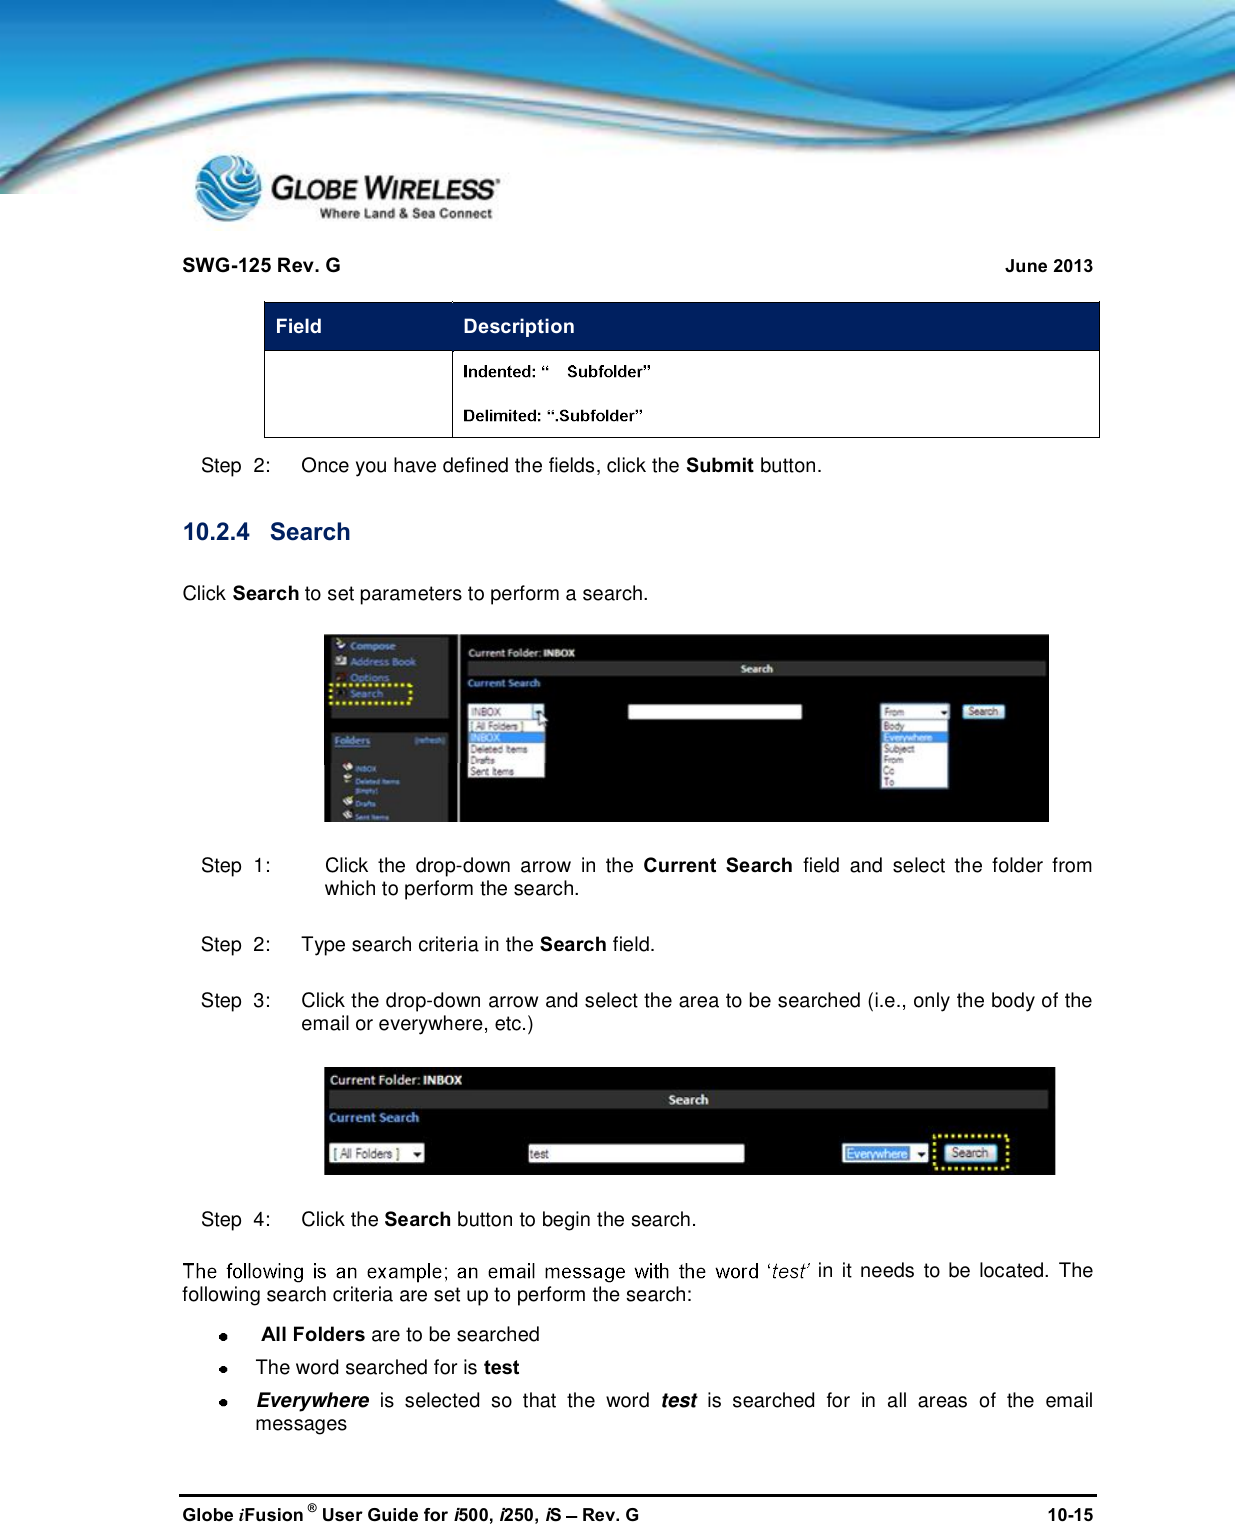 SWG-125 Rev. G June 2013Globe iFusion ®User Guide for i500, i250, iSRev. G 10-15Field DescriptionStep  2:   Once you have defined the fields, click the Submit button.10.2.4 SearchClick Search to set parameters to perform a search.Step  1: Click the drop-down arrow in the Current Search field and select the folder fromwhich to perform the search.Step  2:   Type search criteria in the Search field.Step  3:   Click the drop-down arrow and select the area to be searched (i.e., only the body of theemail or everywhere, etc.)Step  4:   Click the Search button to begin the search.in it needs to be located. Thefollowing search criteria are set up to perform the search:All Folders are to be searchedThe word searched for is testEverywhere is selected so that the word test is searched for in all areas of the emailmessages